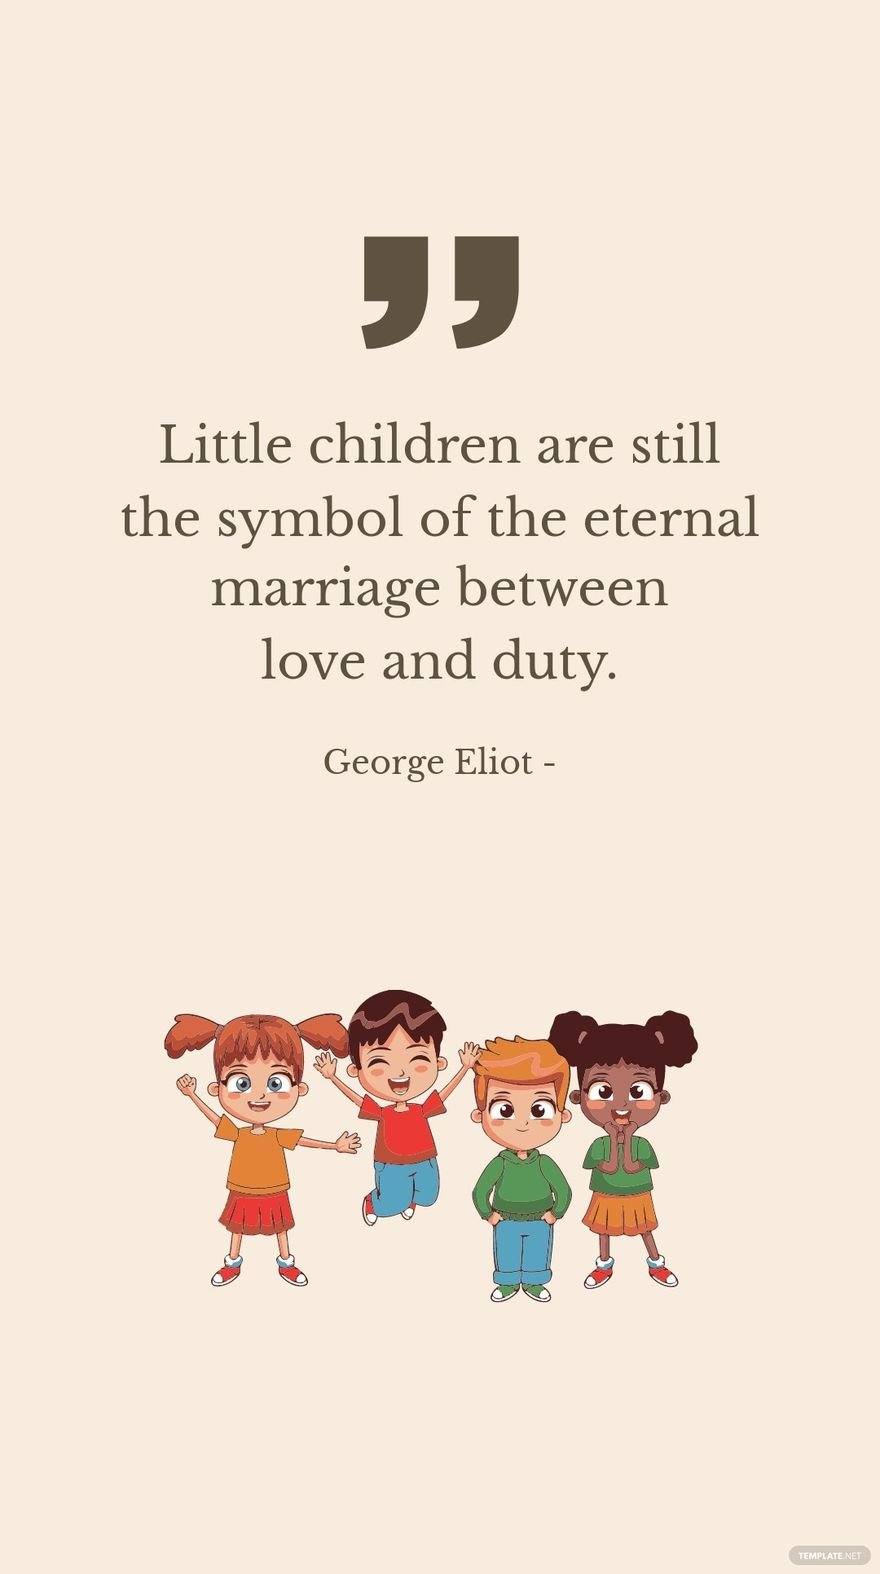 George Eliot - Little children are still the symbol of the eternal marriage between love and duty.